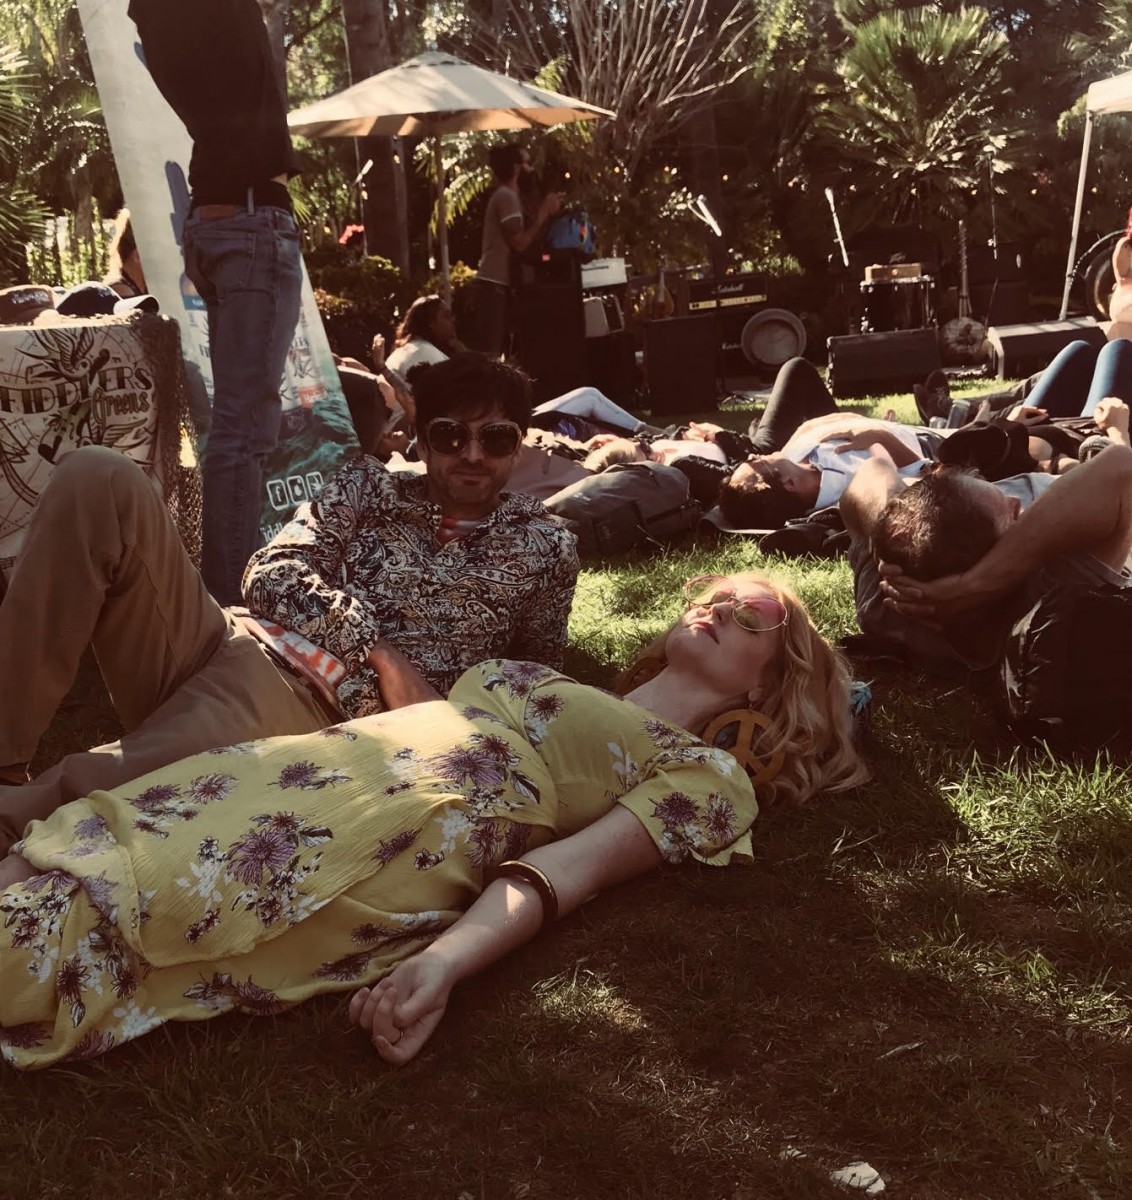 Event Review: Cannabliss Retreats 420 Party in Malibu, CA – Redefining Cannabis, Eradicating the Stigma